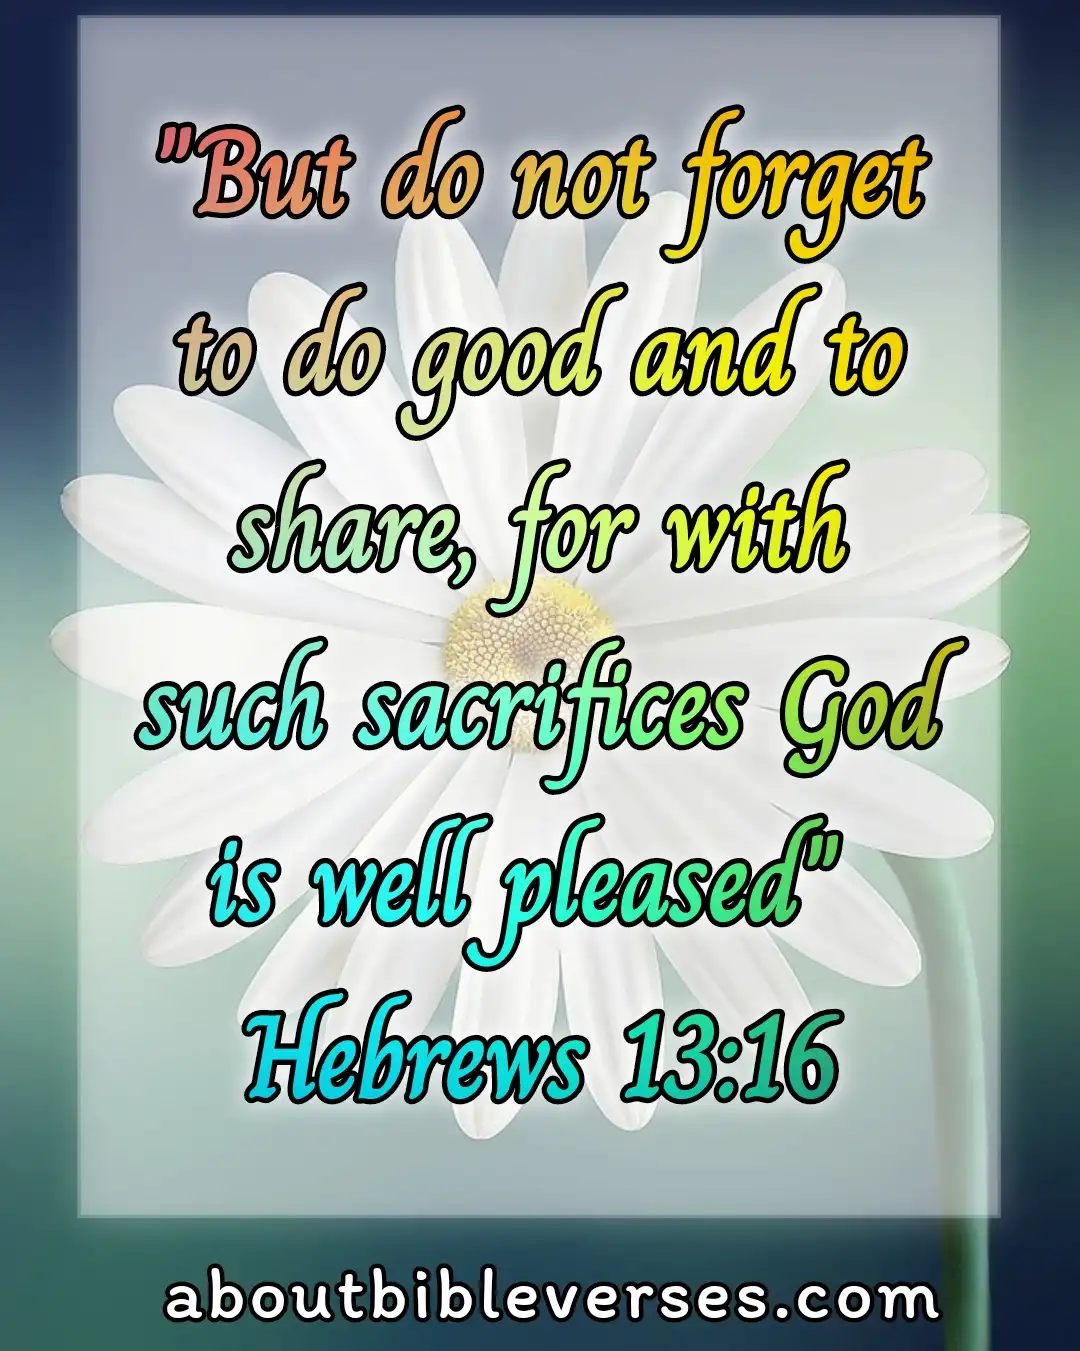 Bible Verses About Serving Others (Hebrews 13:16)